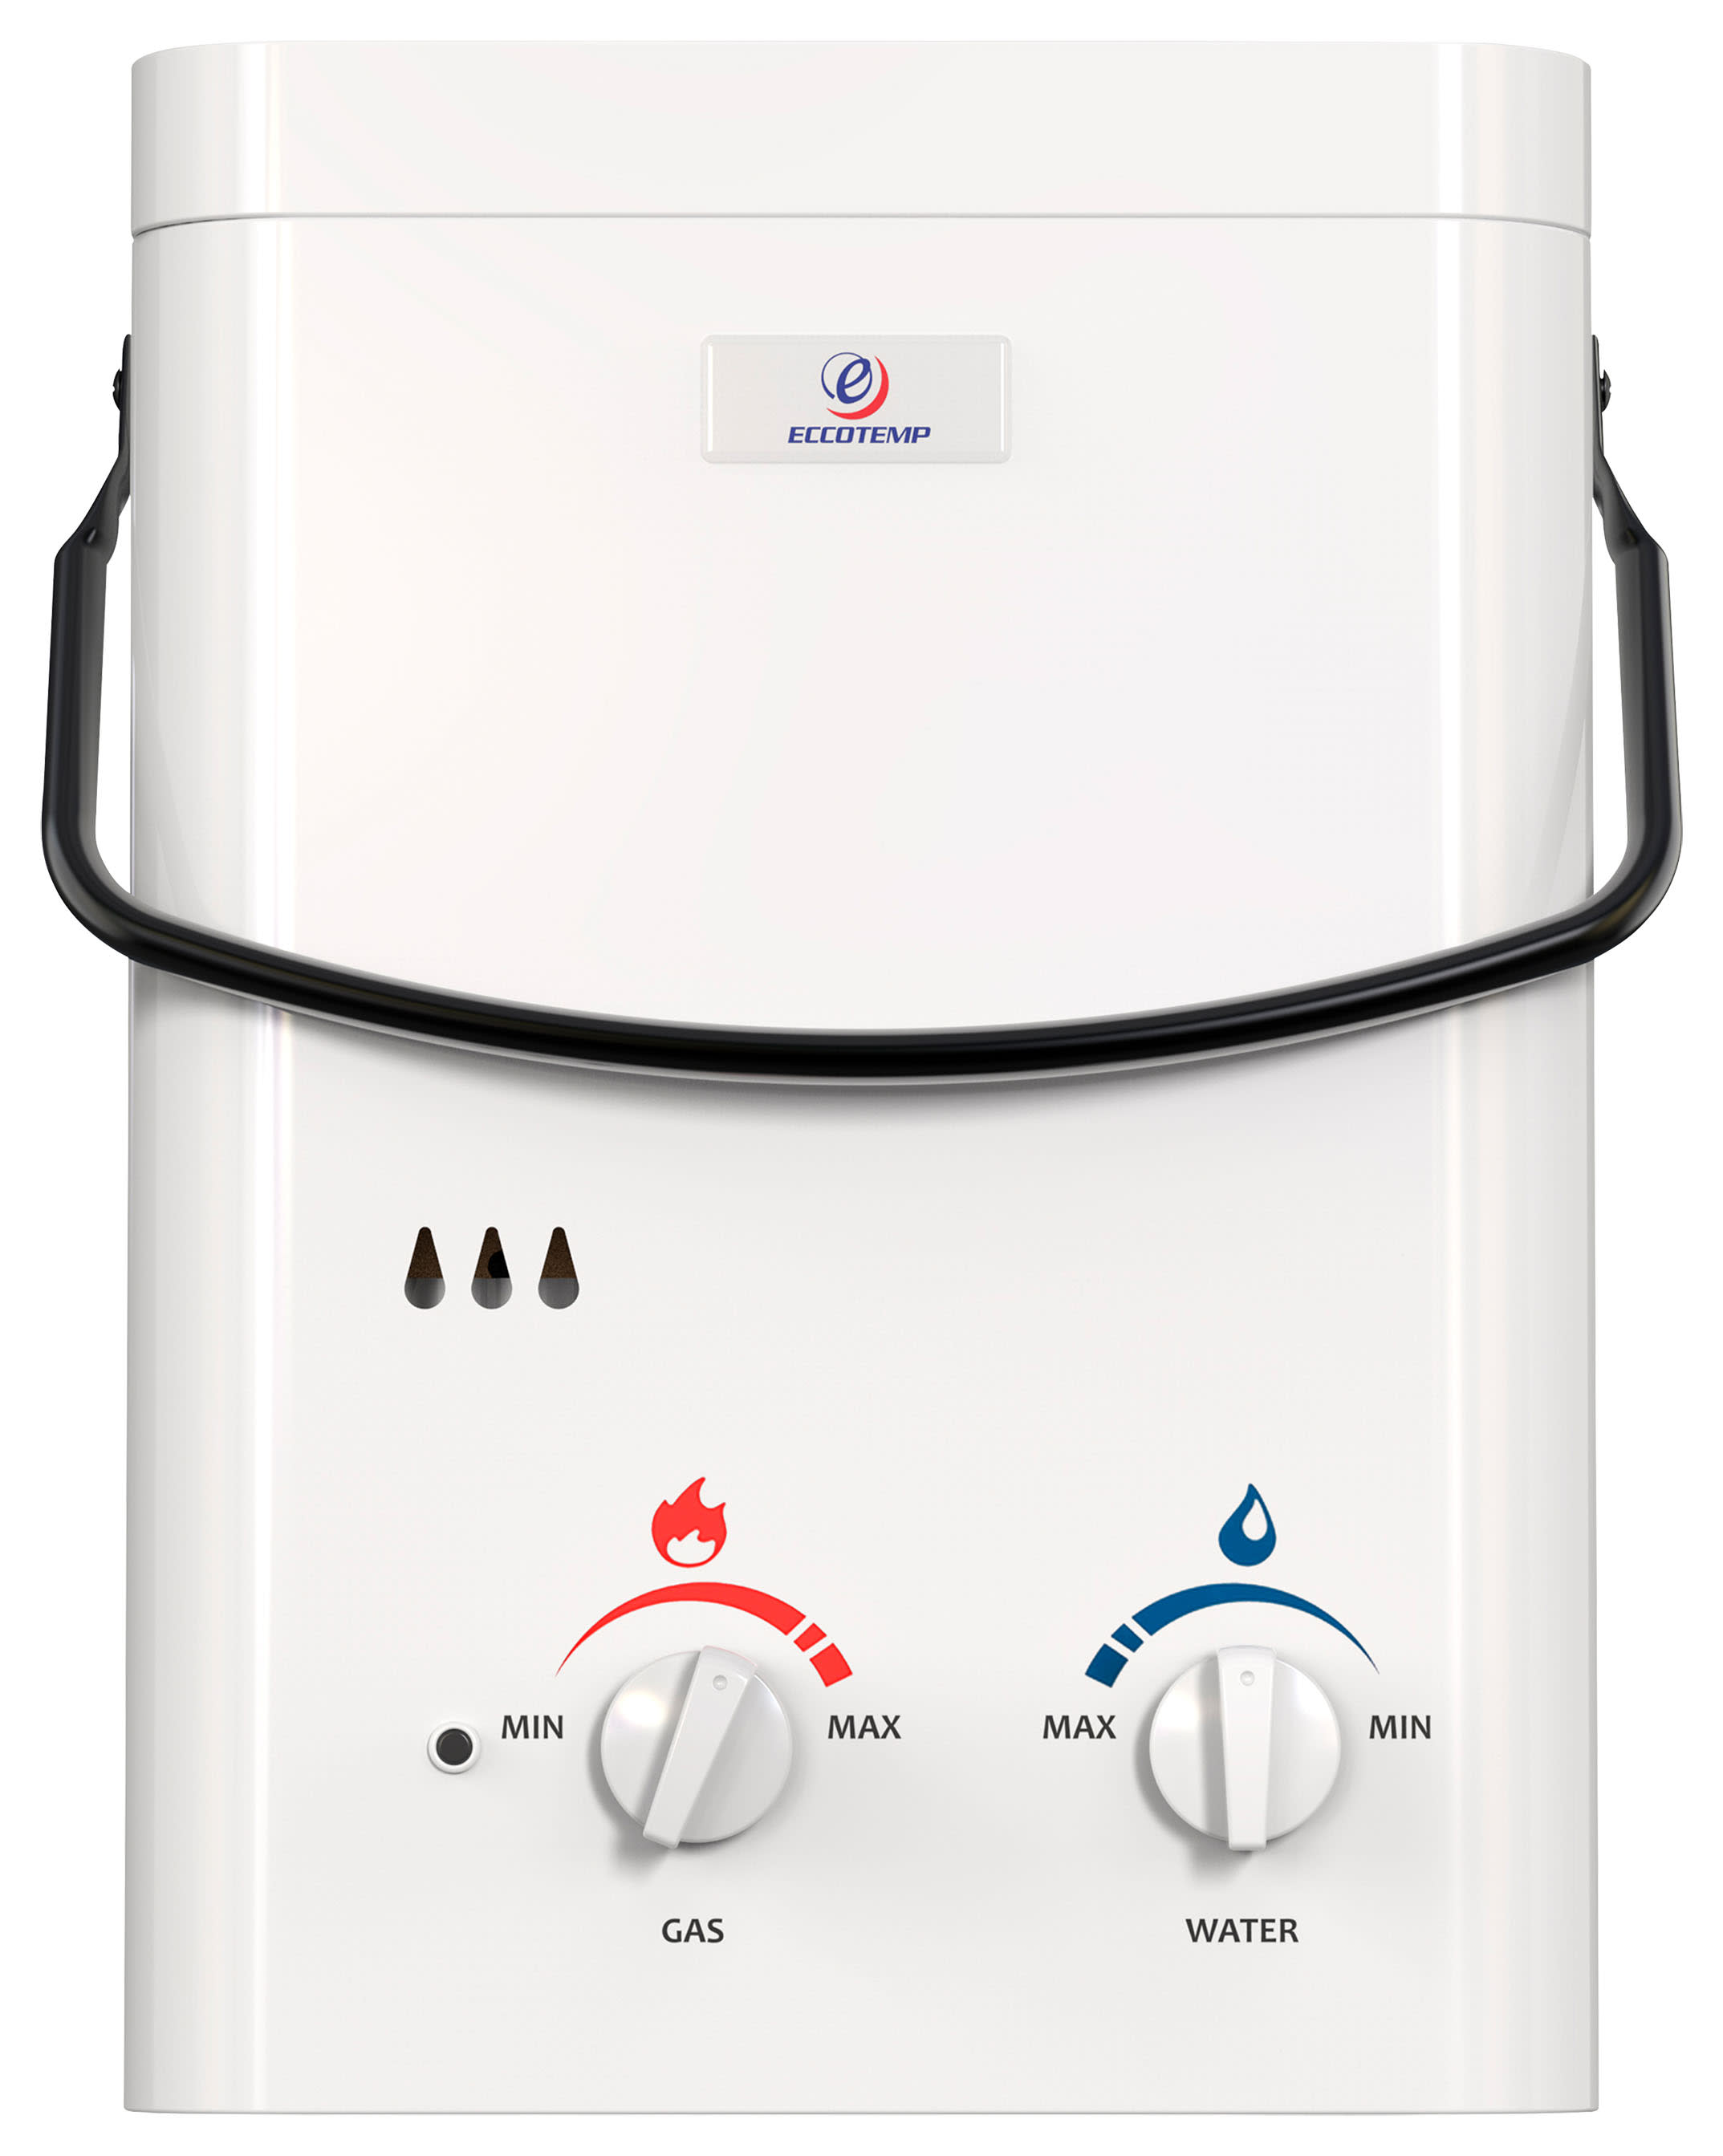 Eccotemp L5 Portable Tankless Water Heater with Pump